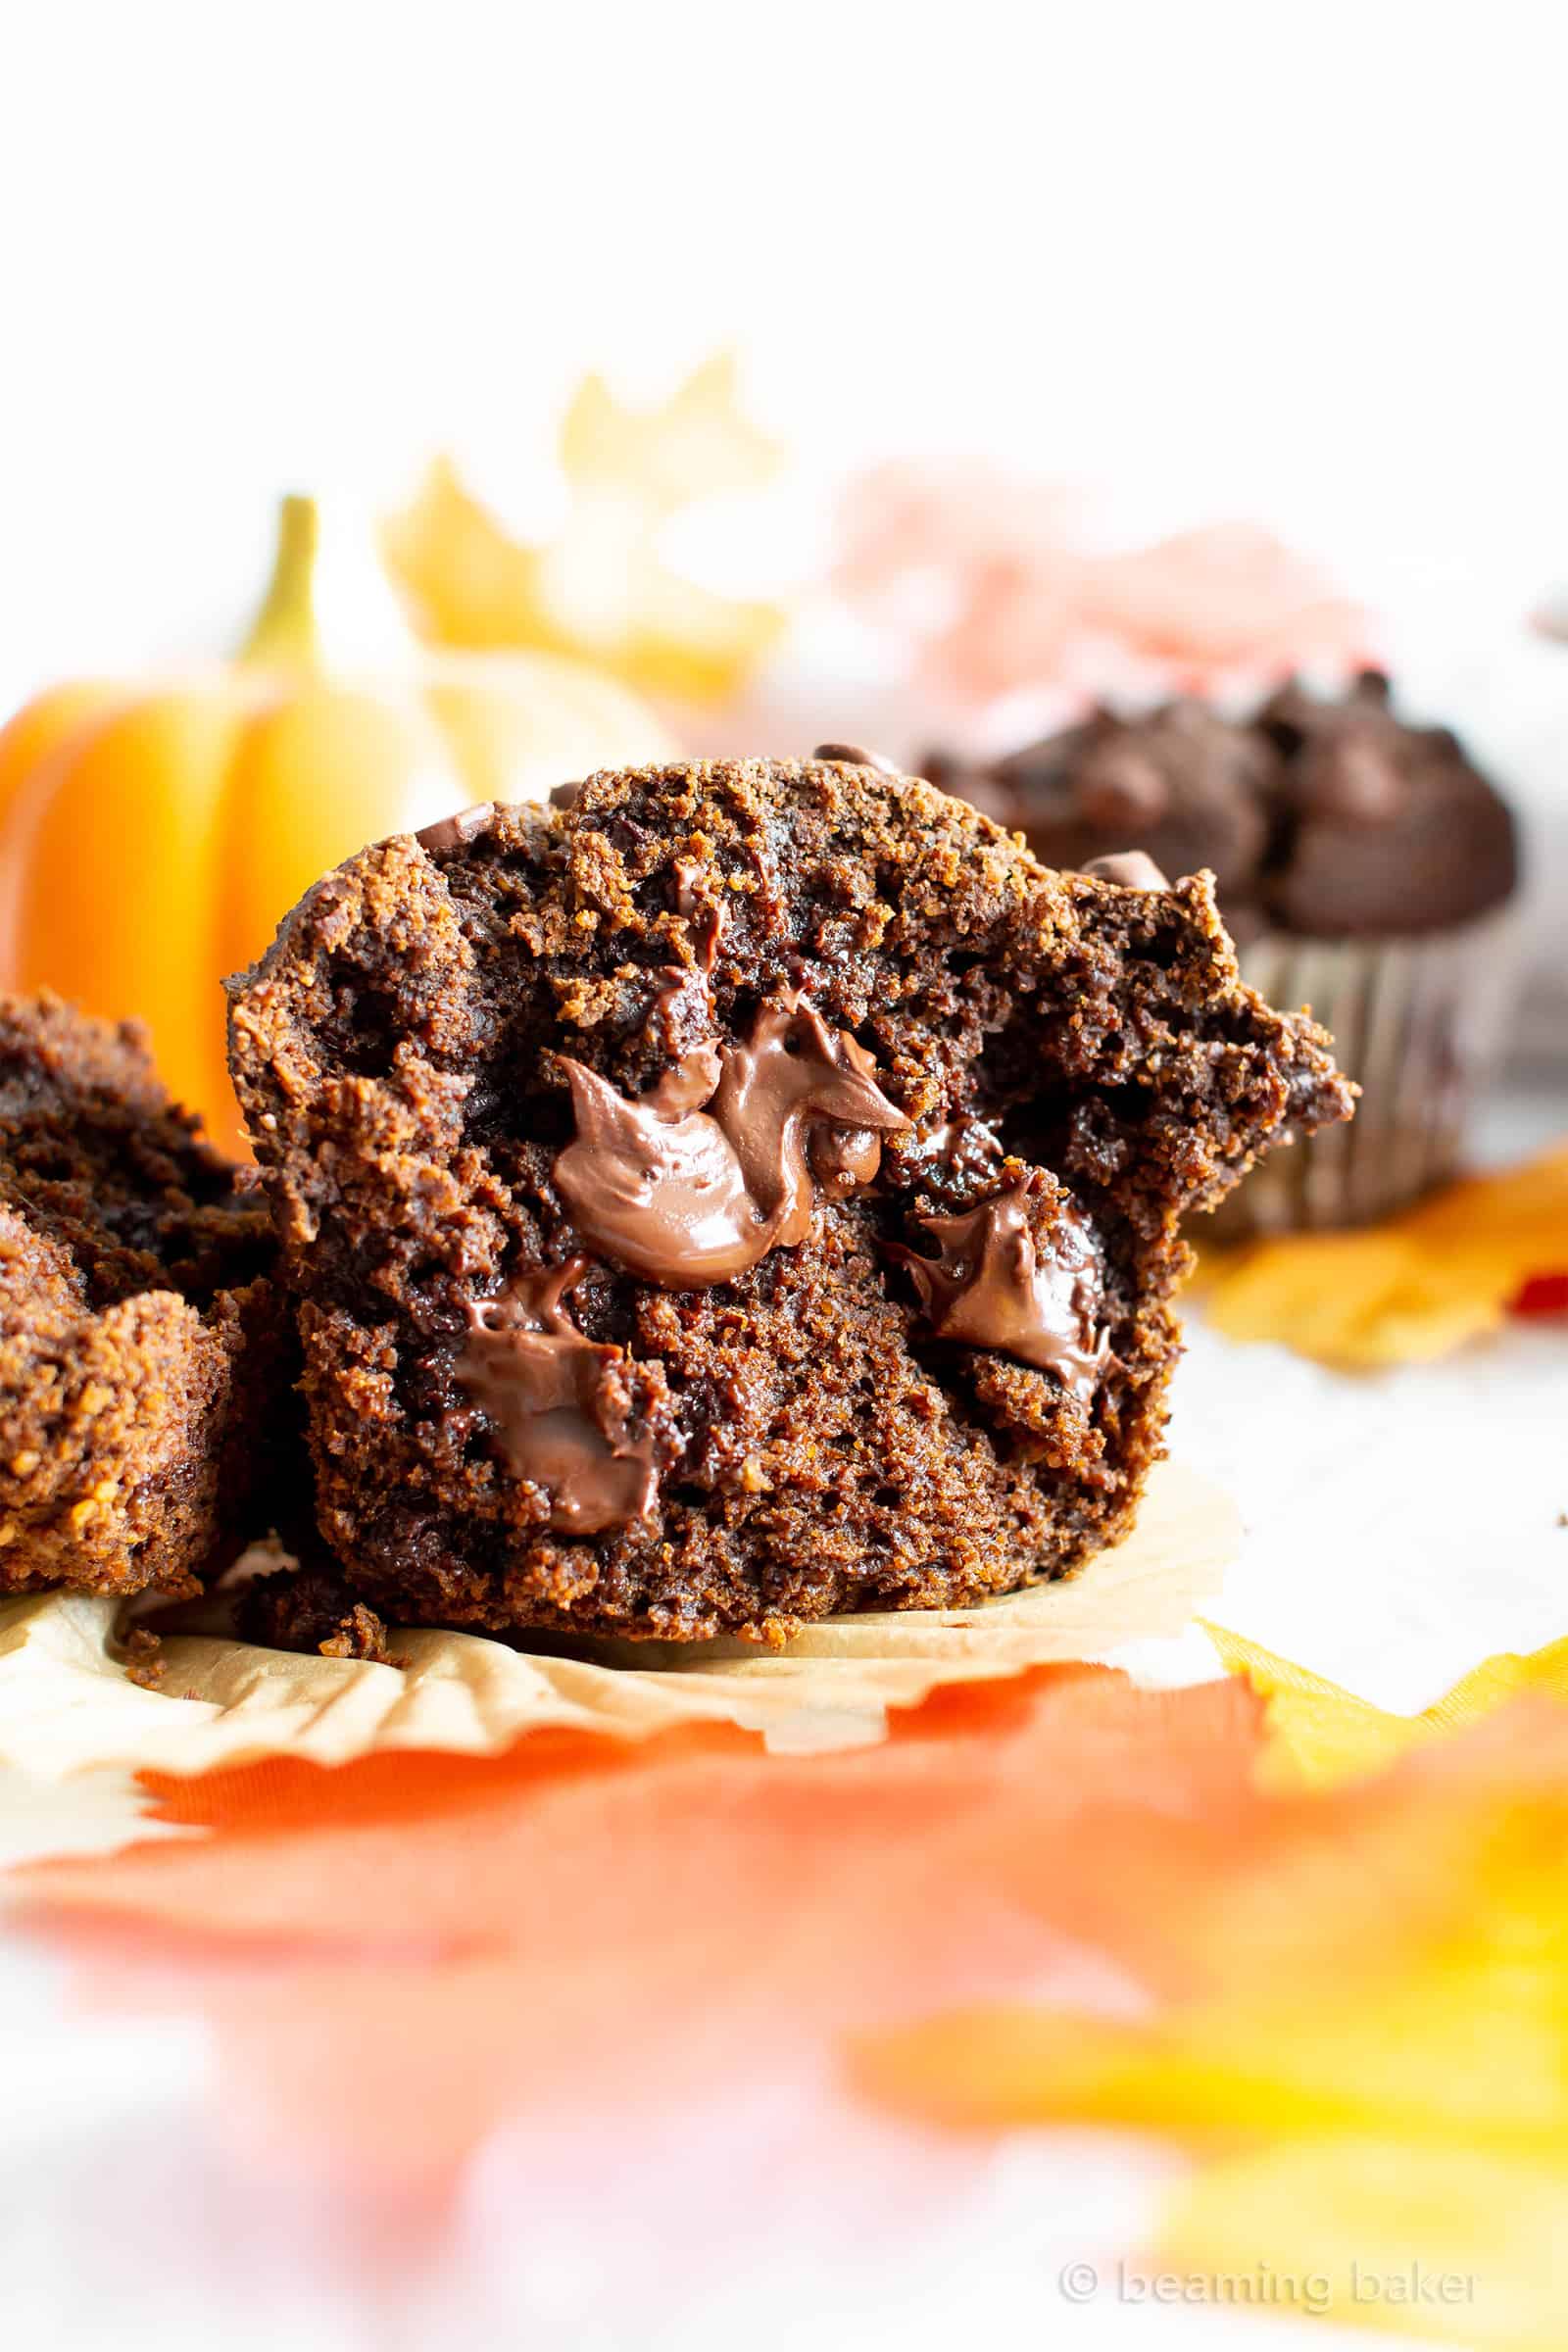 Easy Gluten Free Chocolate Pumpkin Muffins (V, GF): a one bowl recipe for moist, fudgy chocolate pumpkin muffins packed with rich fall flavors! Made with healthy, whole ingredients. #Vegan #GlutenFree #Muffins #Pumpkin #Fall #Chocolate #CleanEating | Recipe at BeamingBaker.com